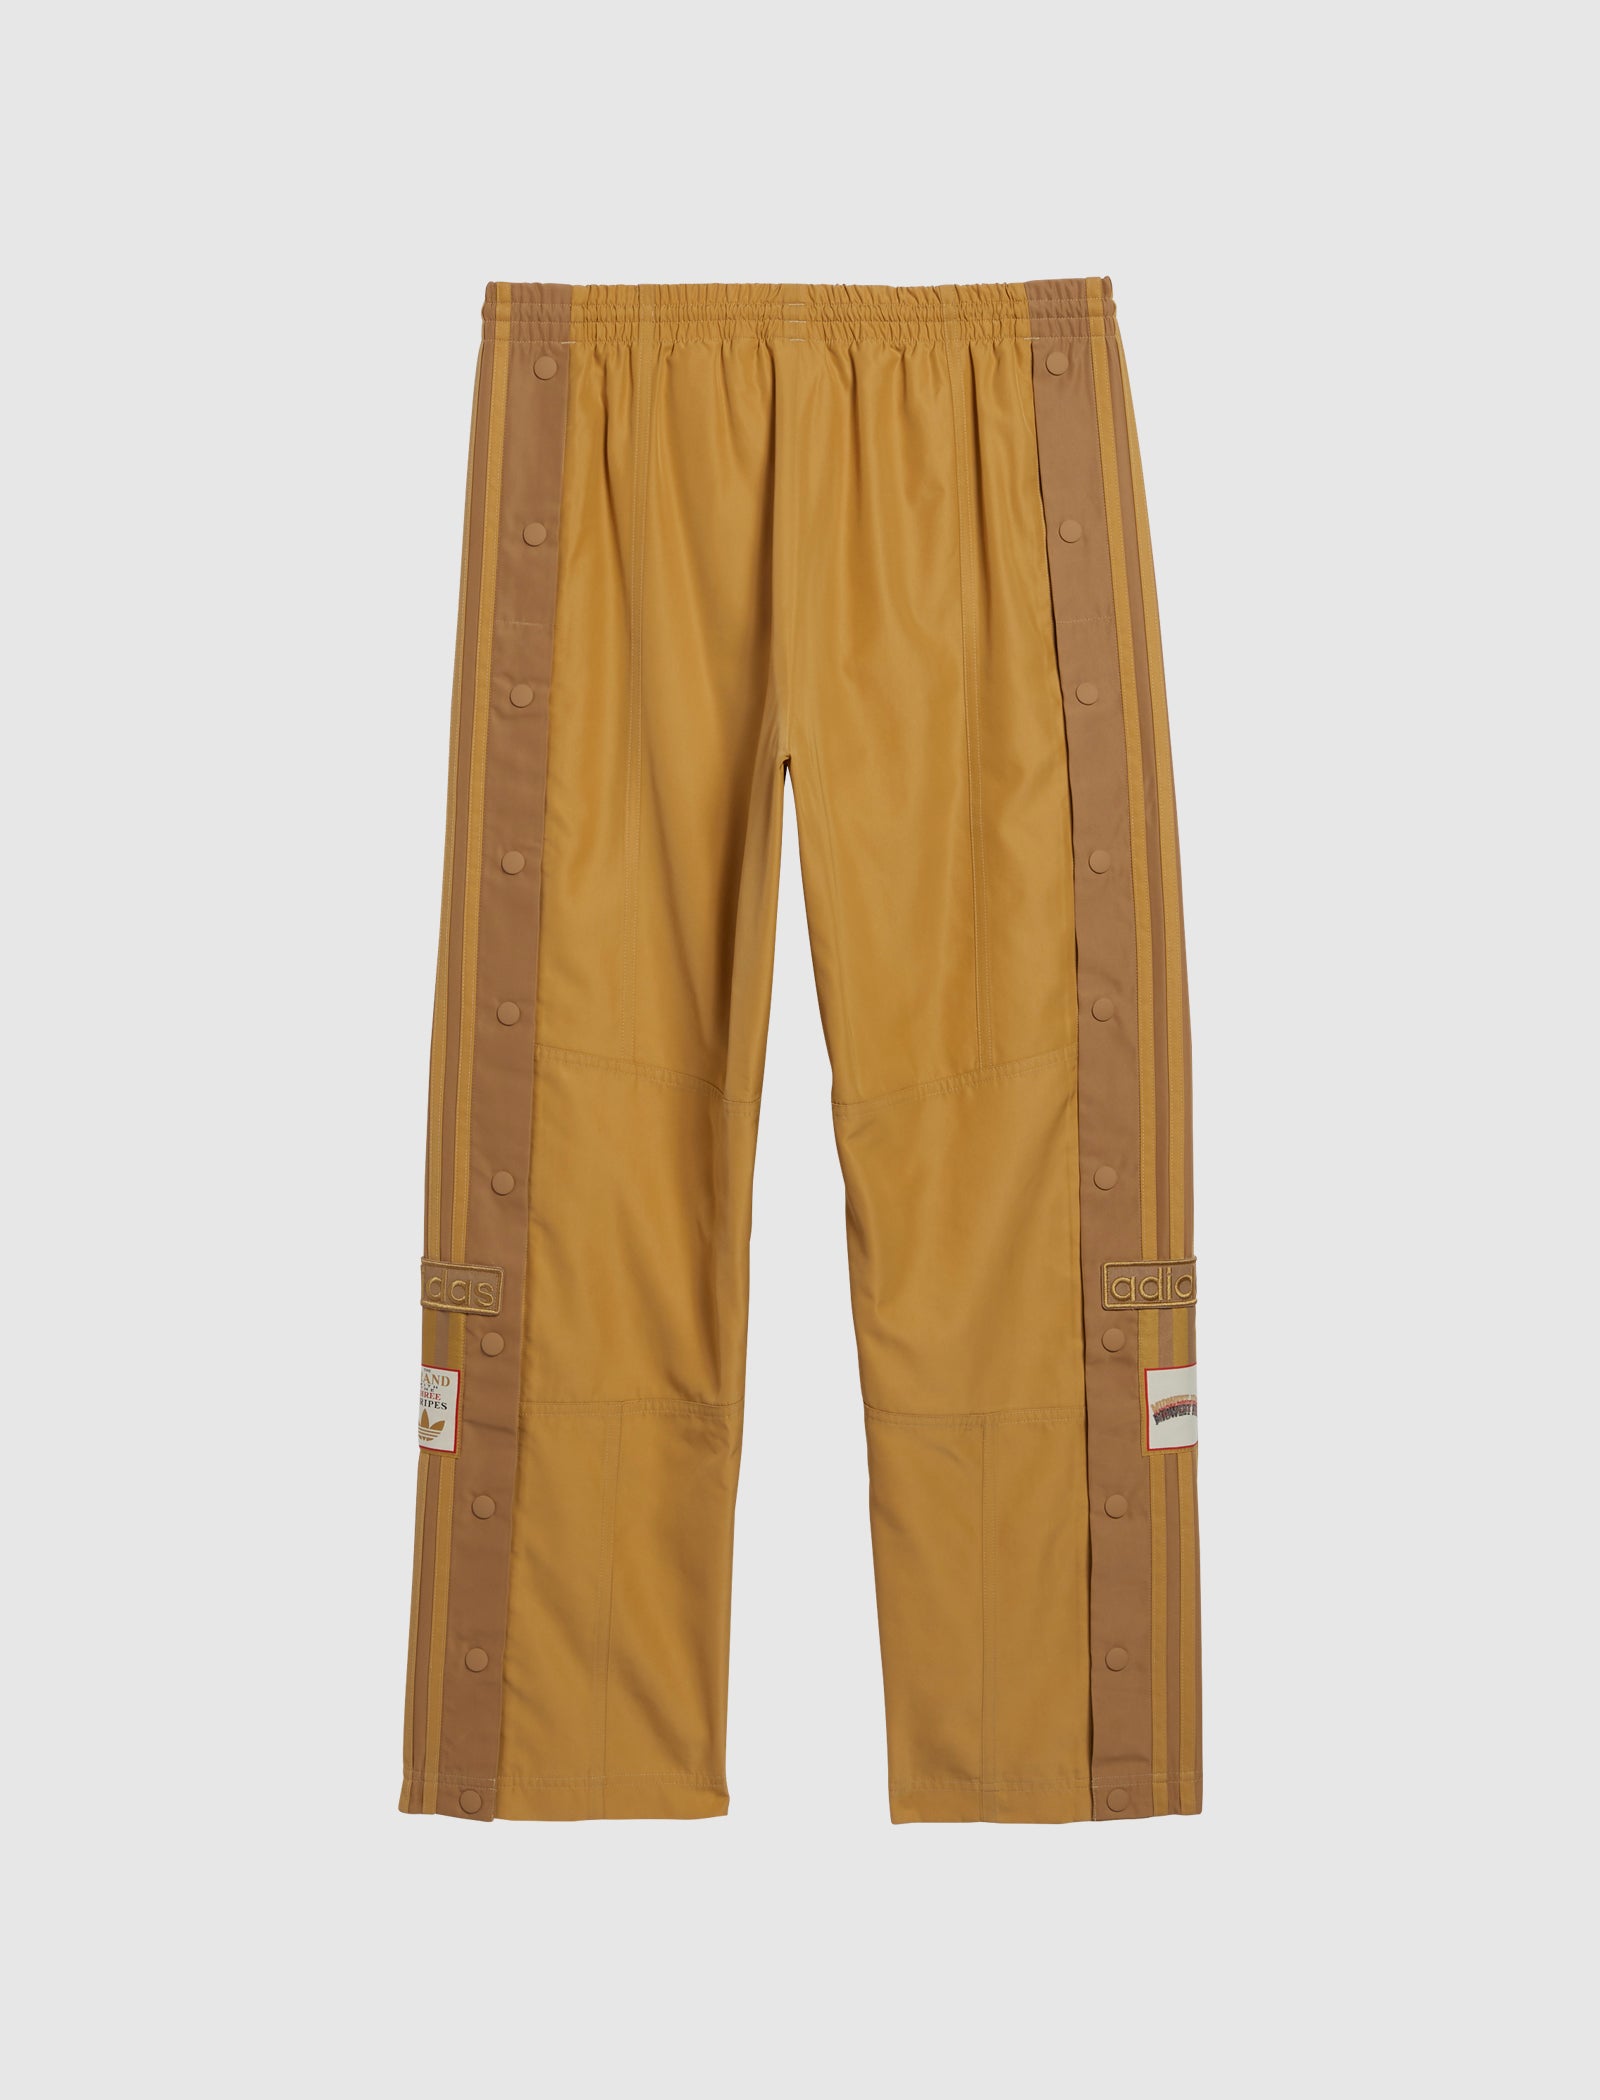 MIDWEST KIDS JOURNEY TRACK PANTS